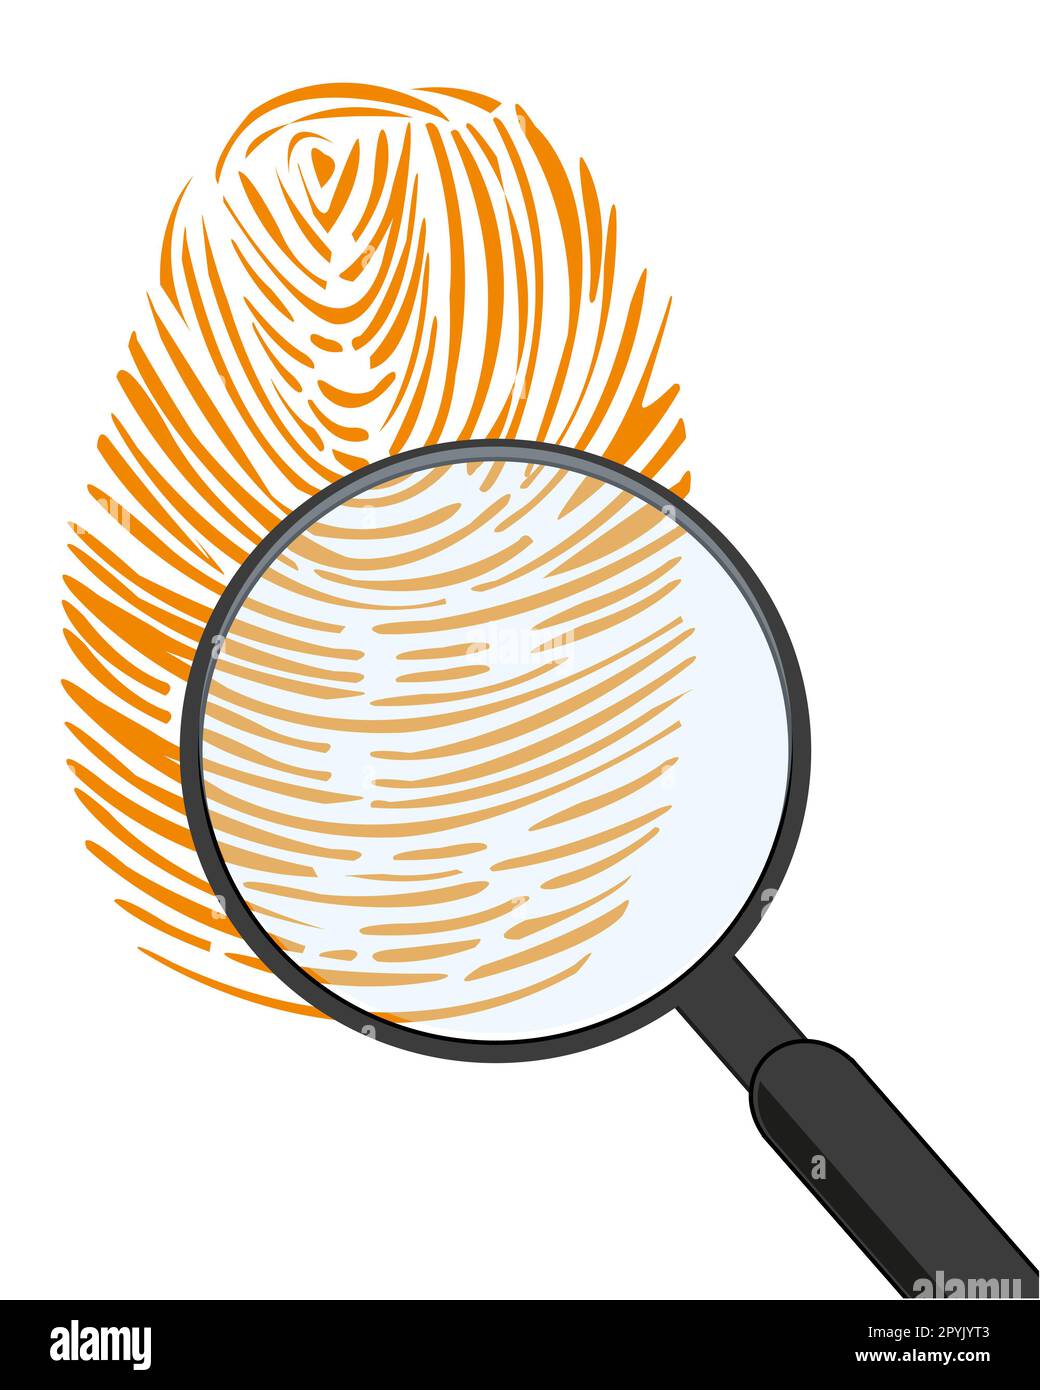 Instrument magnifying glass and fingerprint of the person on white background Stock Photo